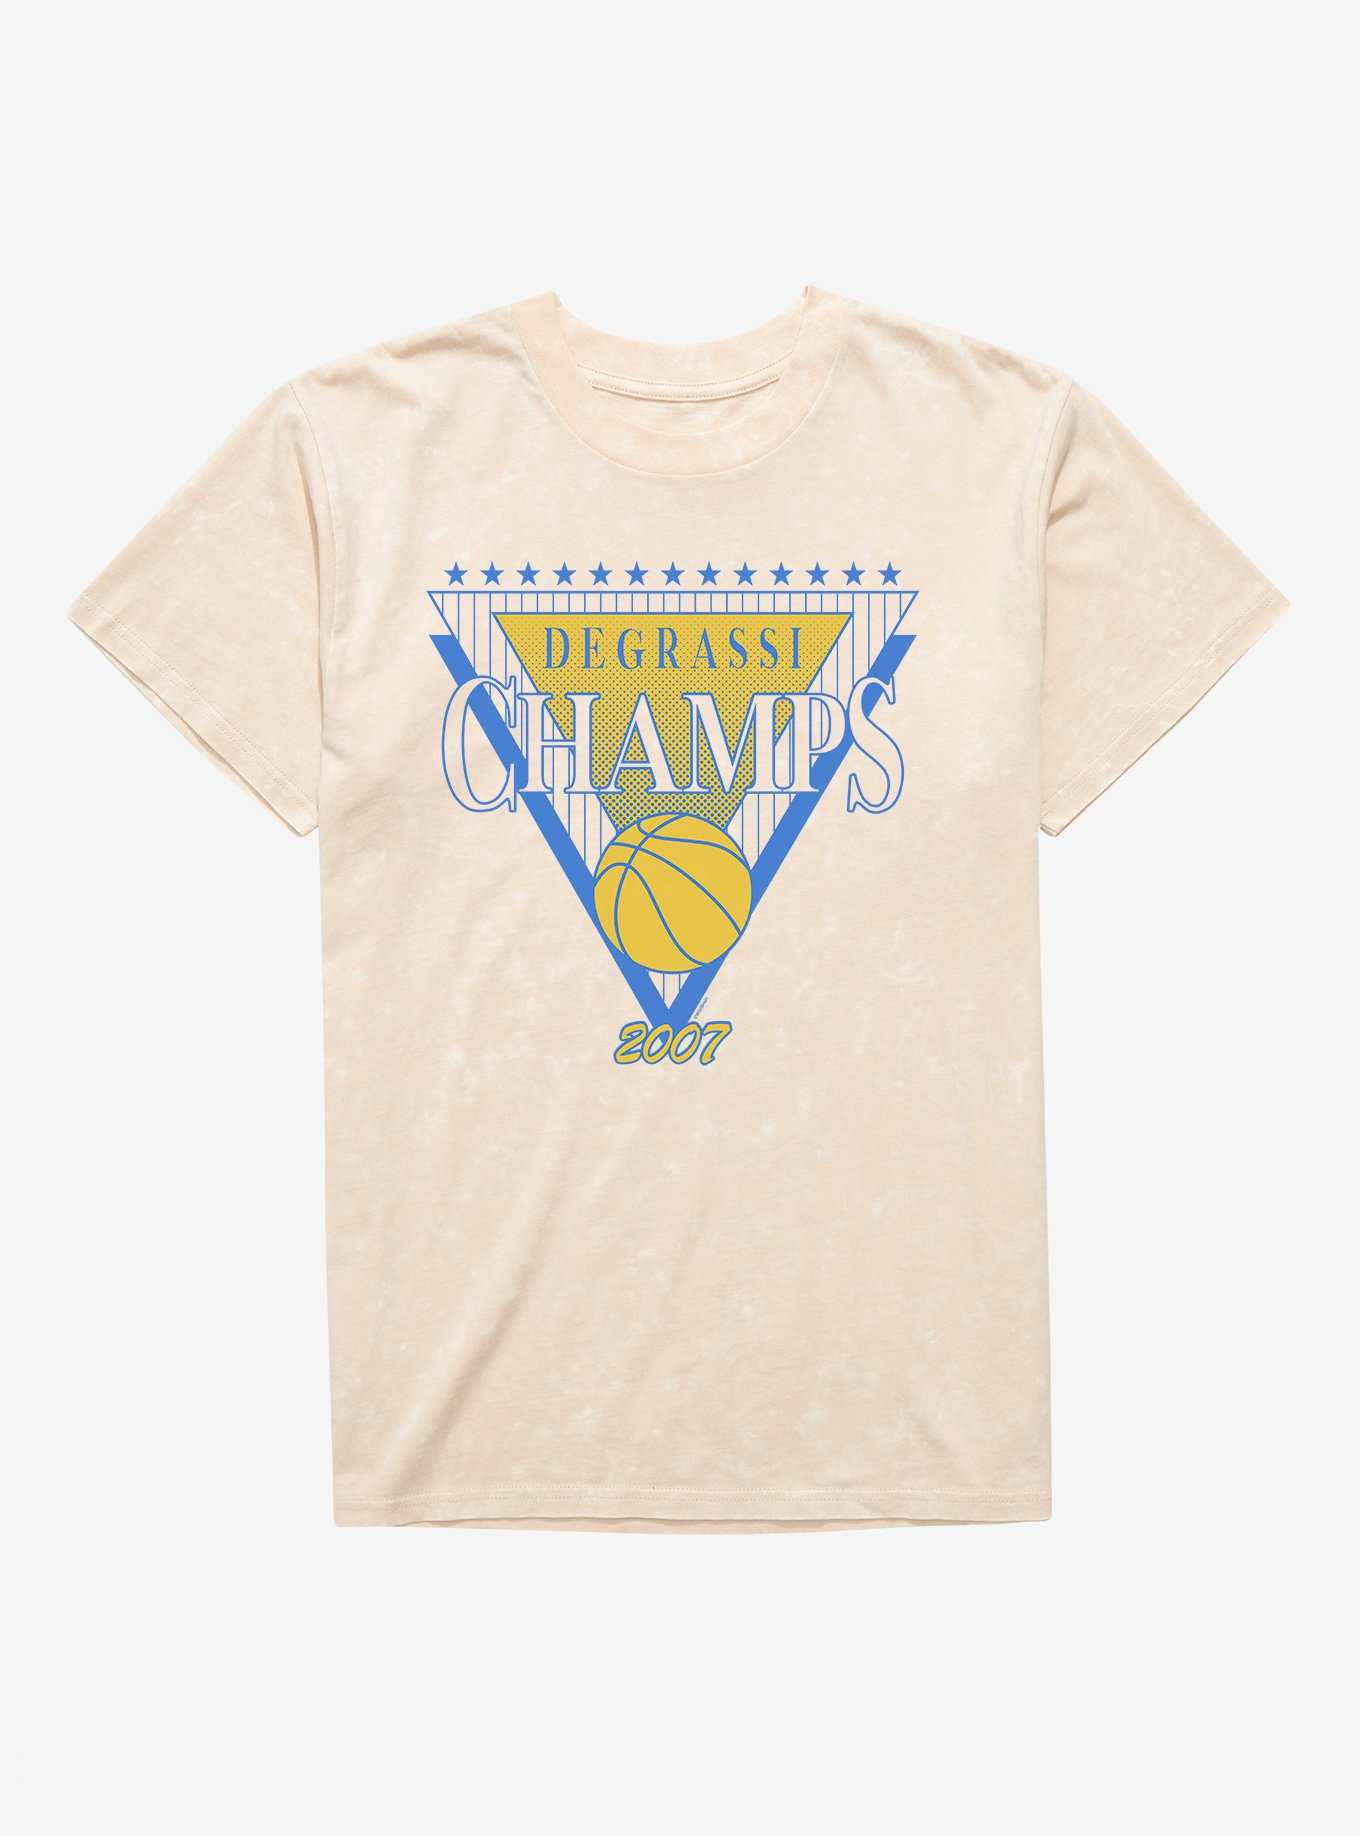 Degrassi: The Next Generation Degrassi 2007 Basketball Champs Mineral Wash T-Shirt, , hi-res